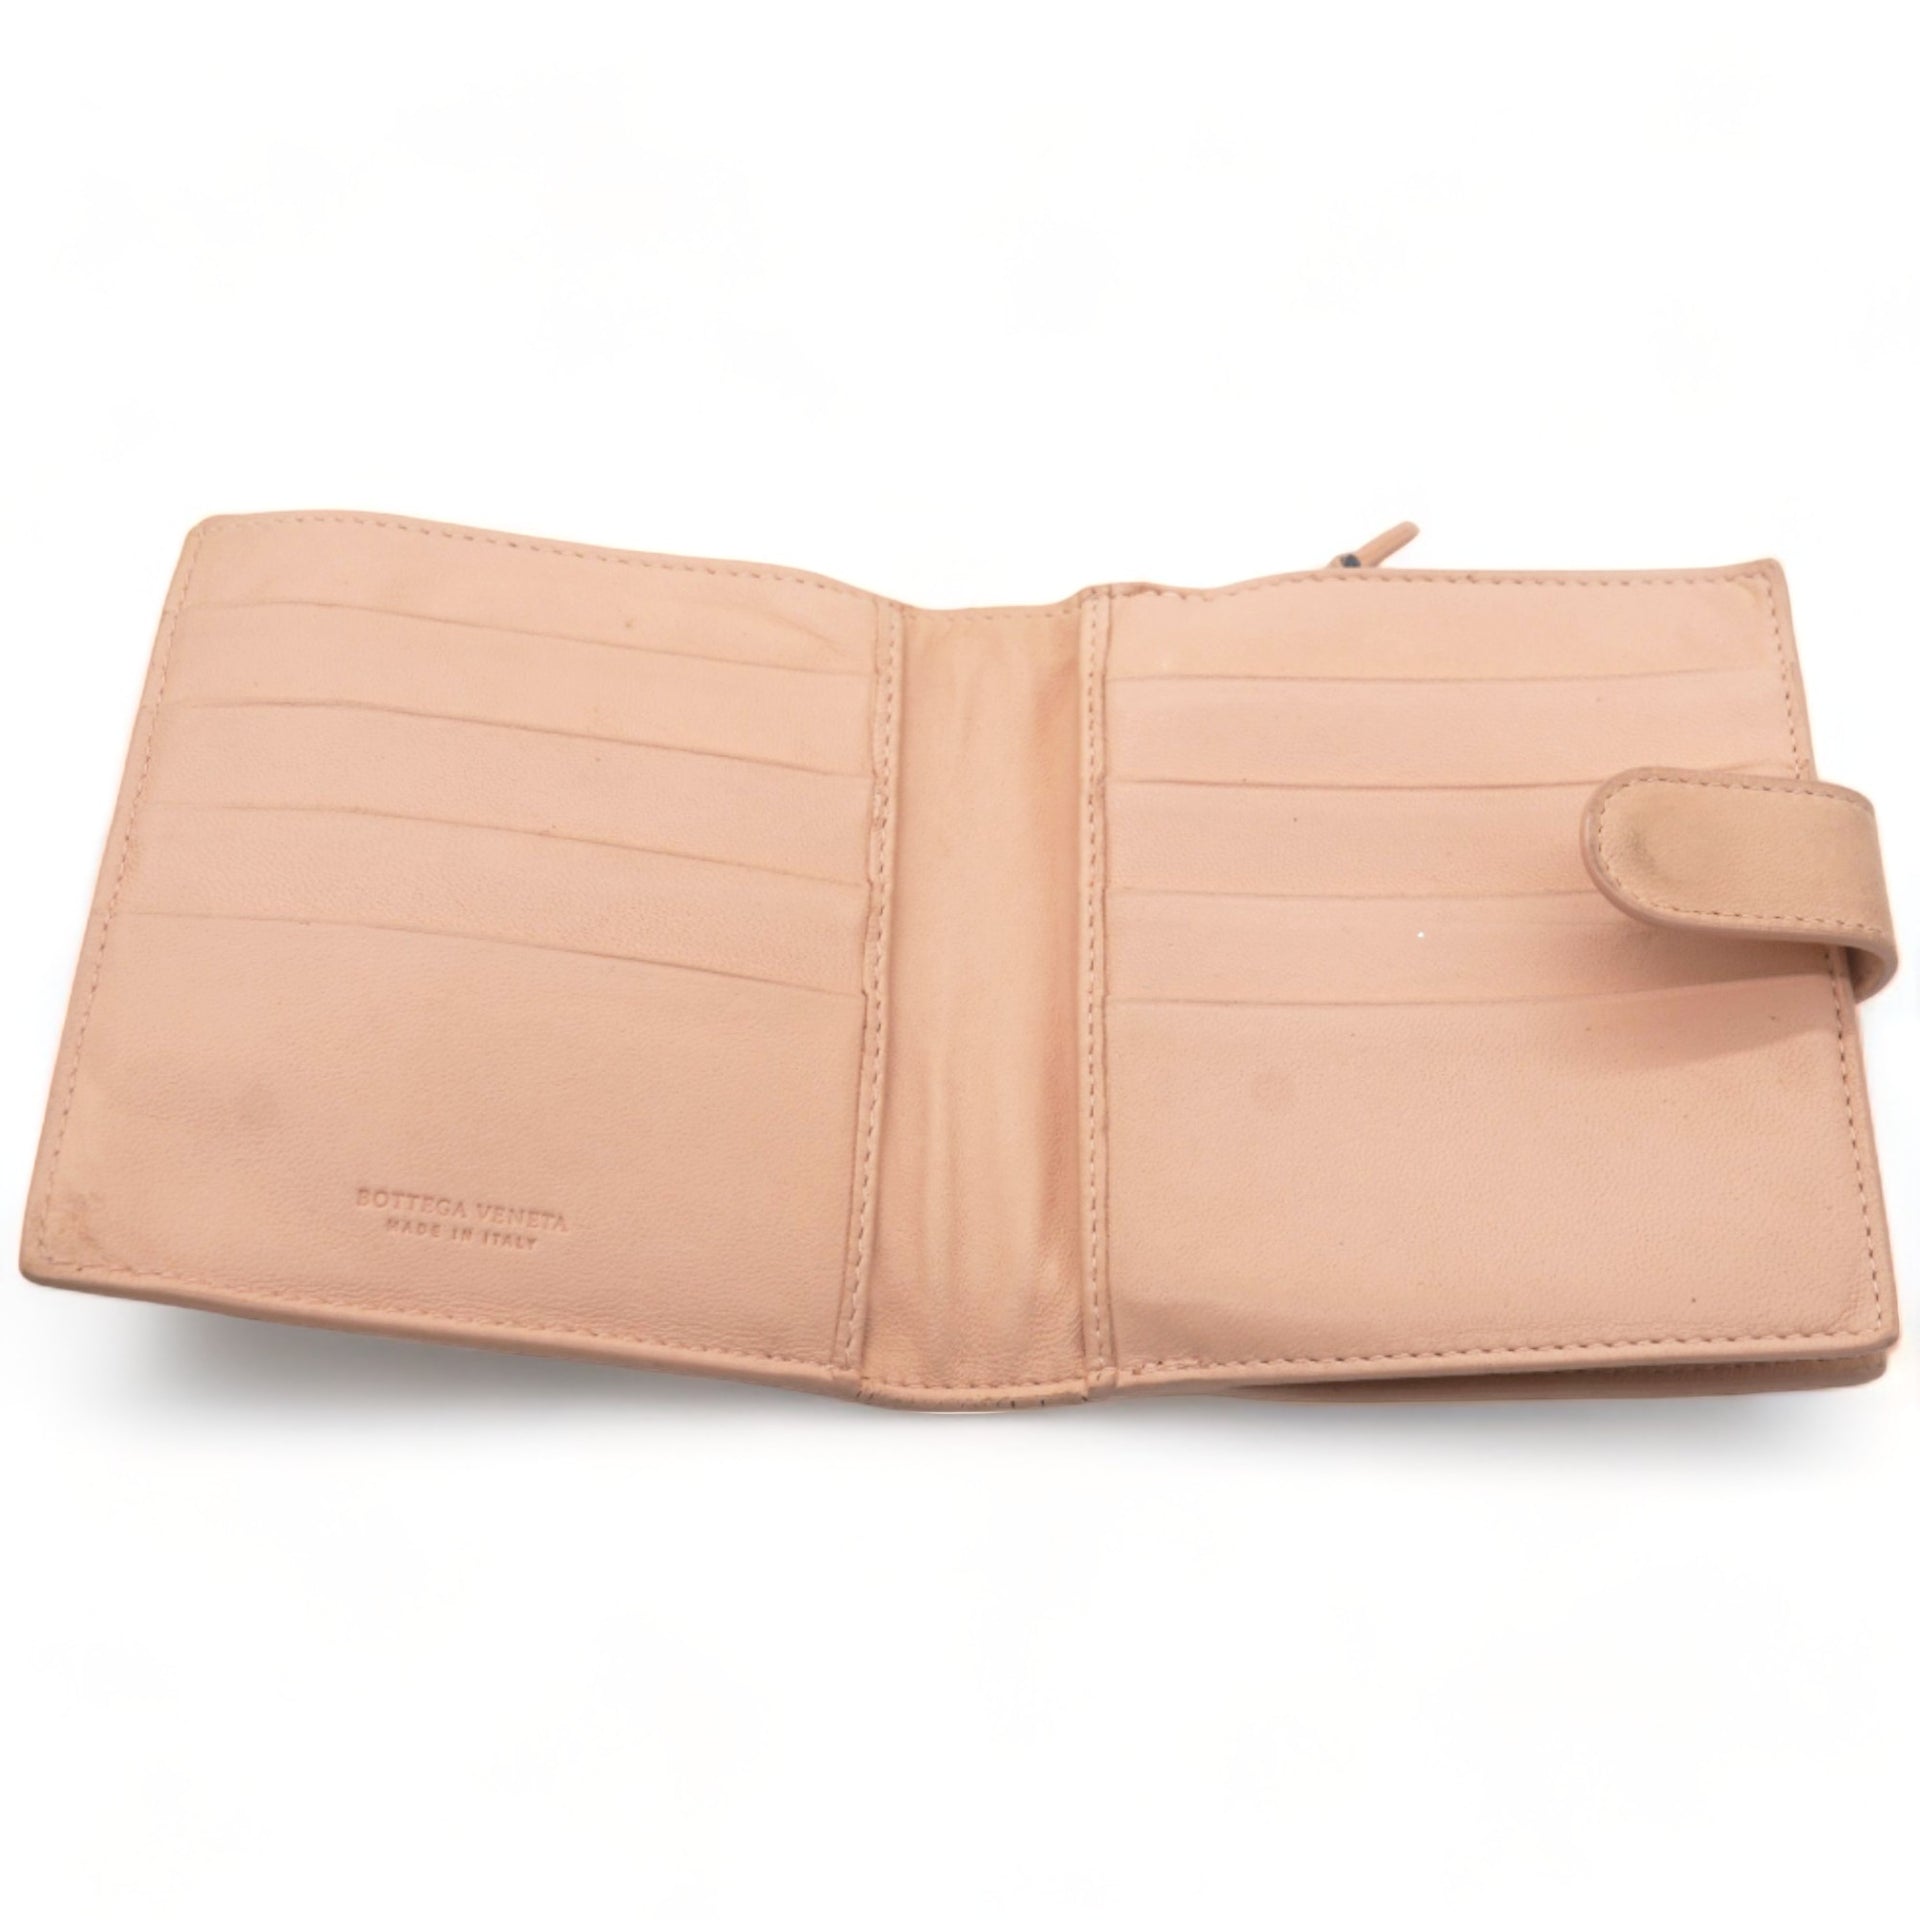 Intrecciato Nappa Leather French Wallet Pink